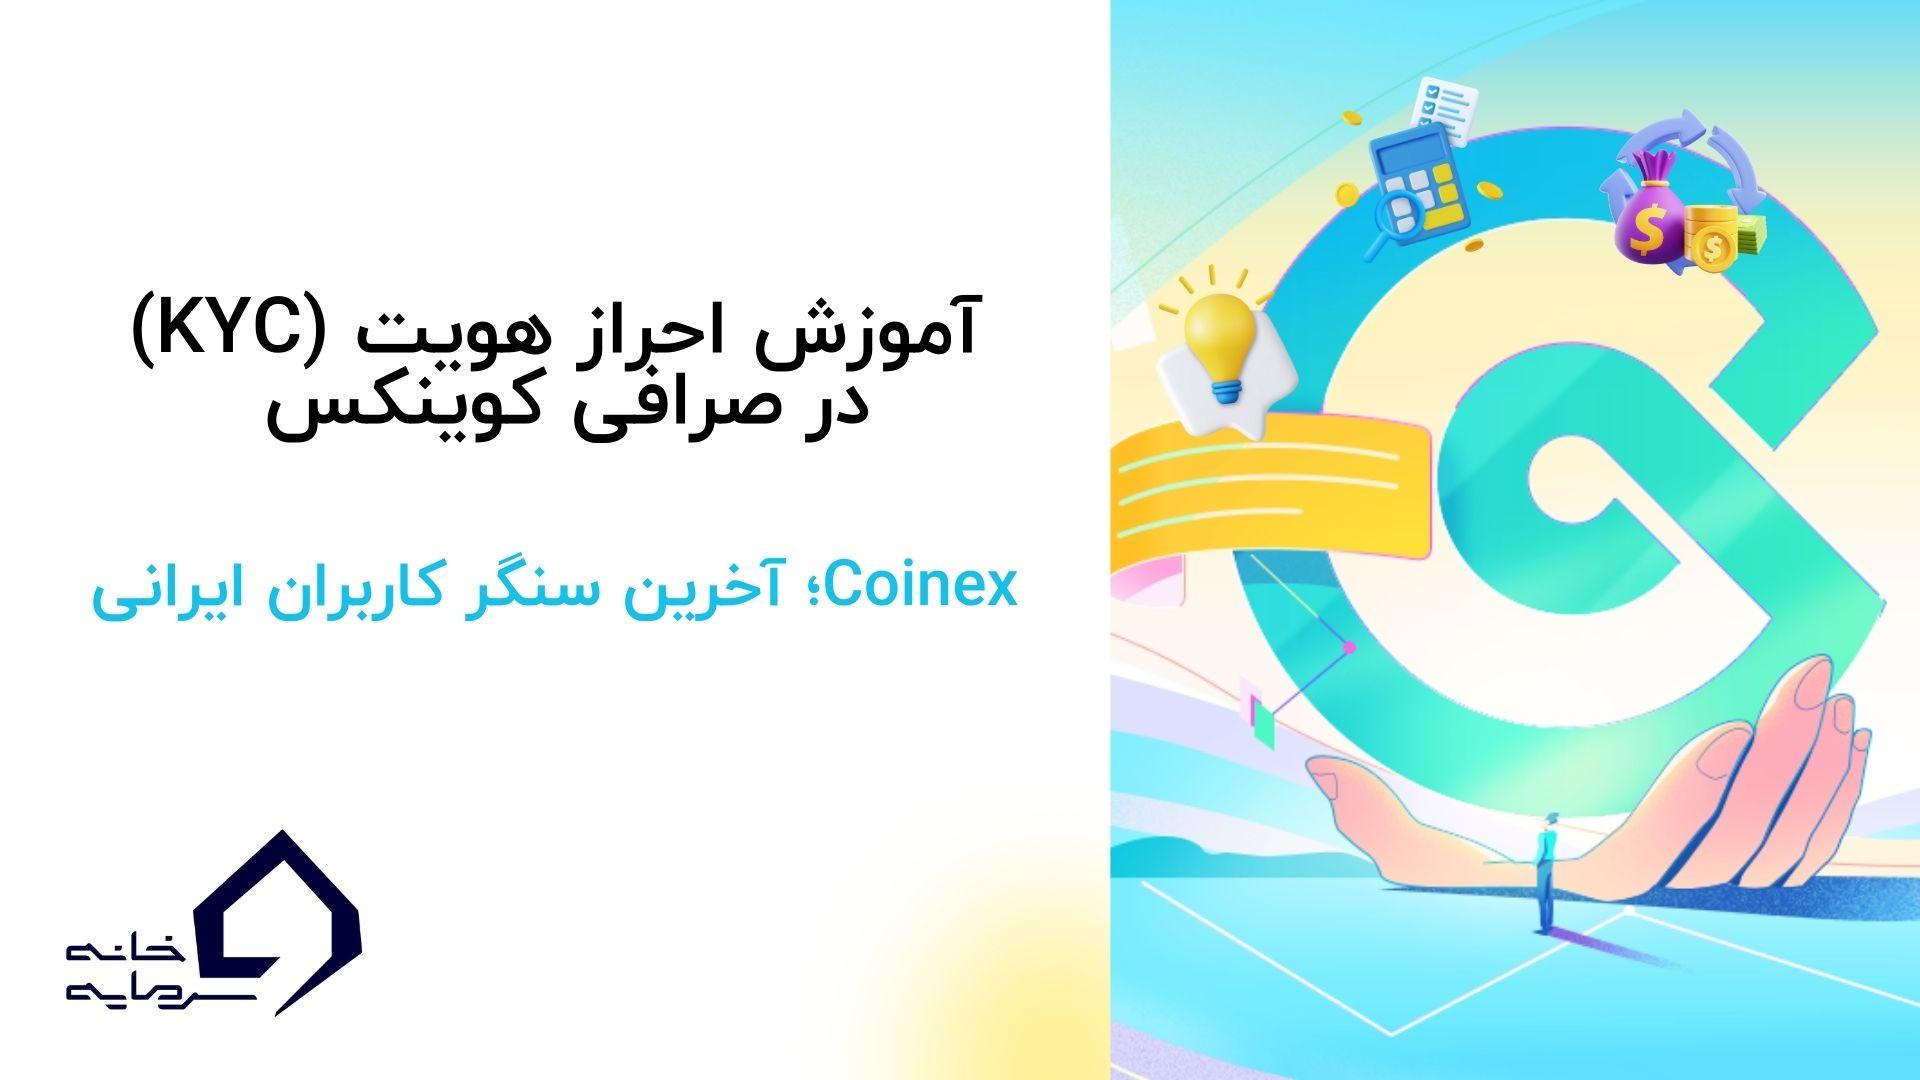 coinex exchange kyc training for iranian users